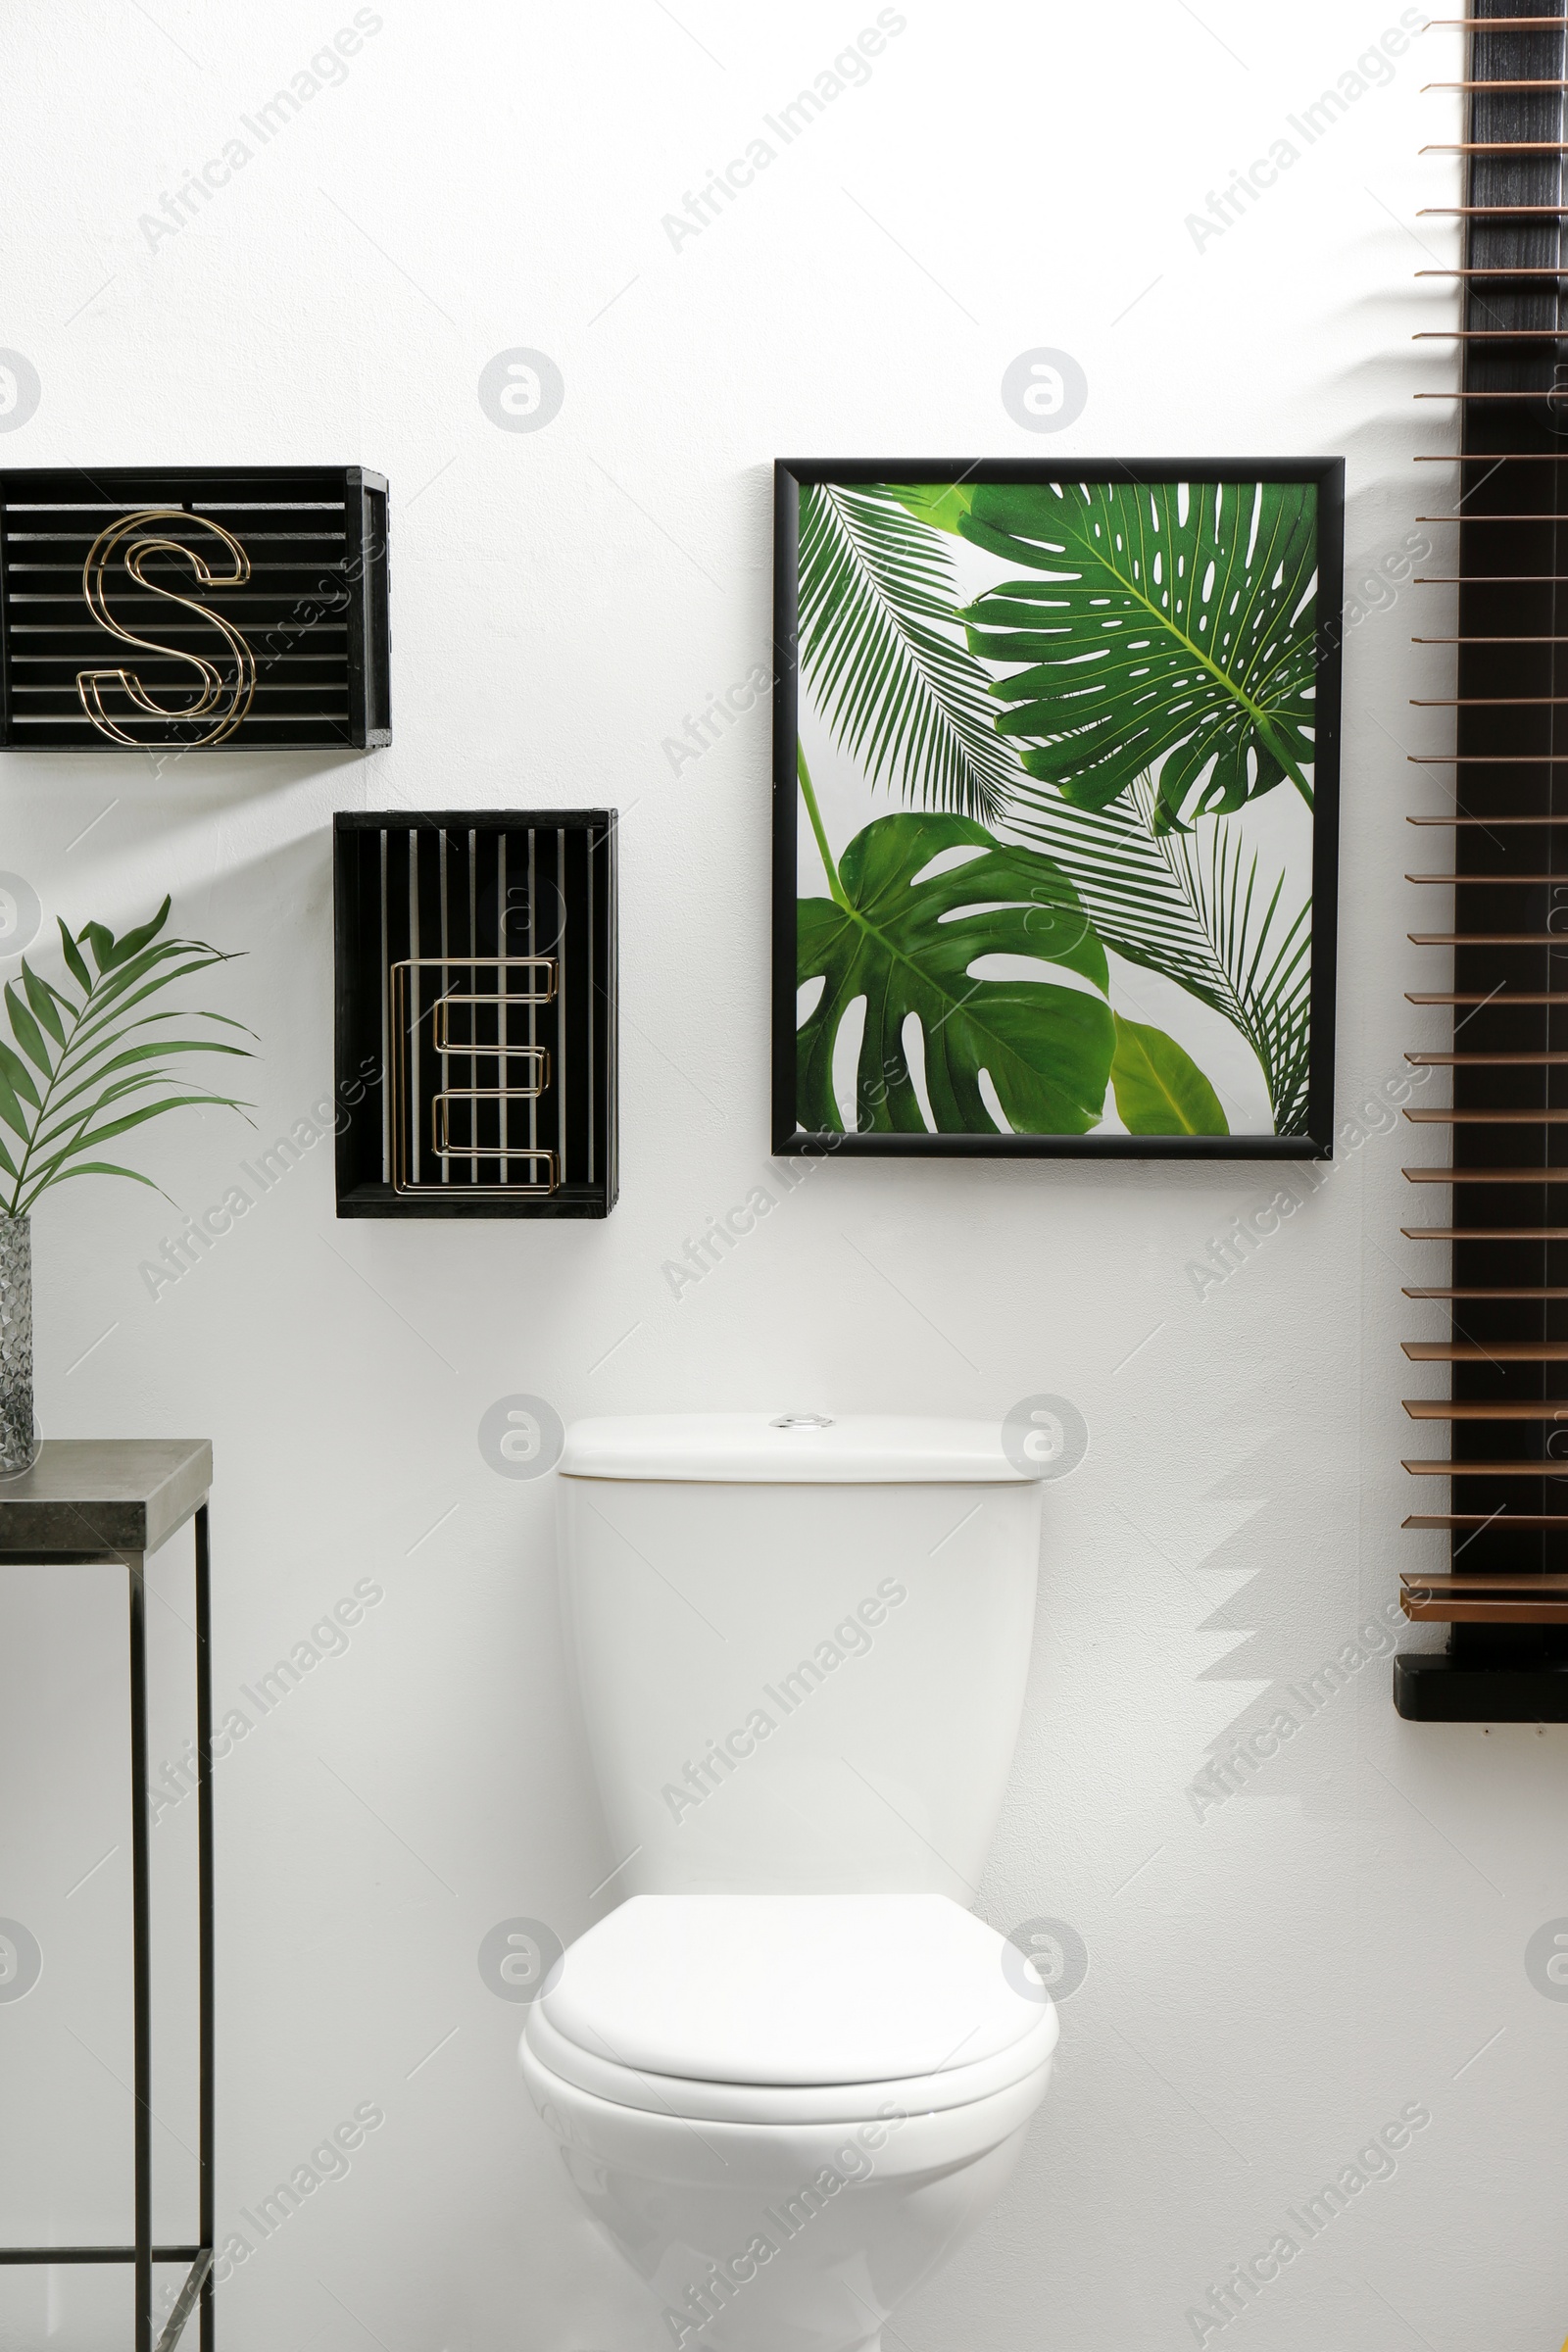 Photo of Picture and shelves near toilet bowl in restroom interior